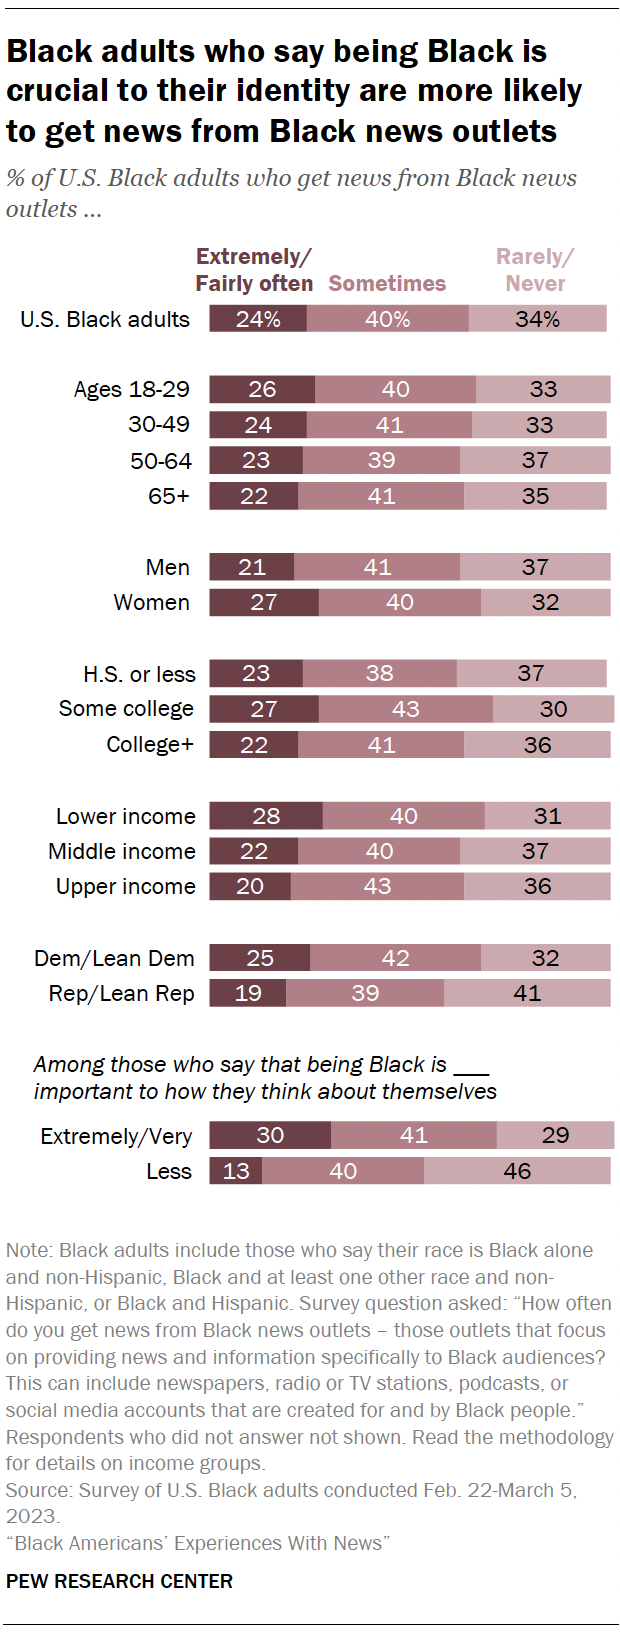 Black adults who say being Black is crucial to their identity are more likely to get news from Black news outlets